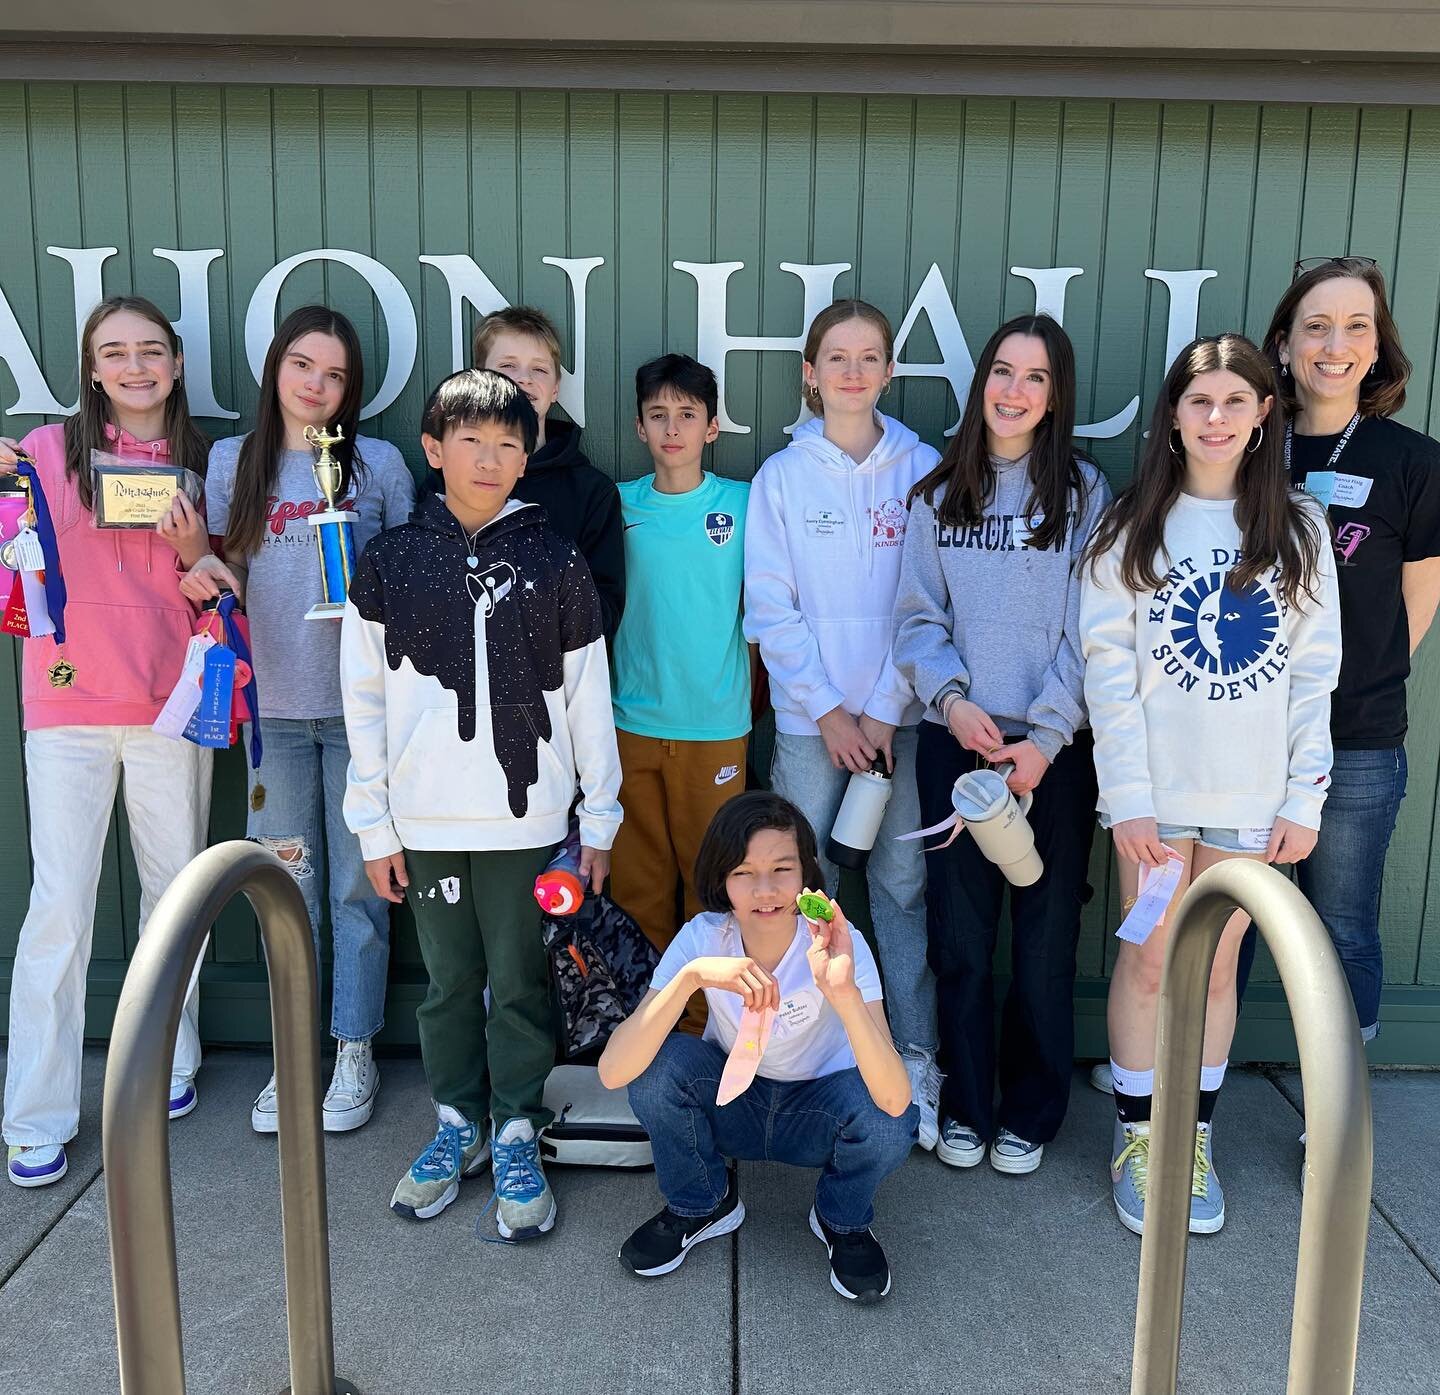 Cathedral Students Compete at Pentagames!

Last Friday, Mrs. Flaig and 9 middle school students attended Pentagames at St. PIus X School. 

Pentagames is a statewide event with the mission to promote and encourage student participation in math by off